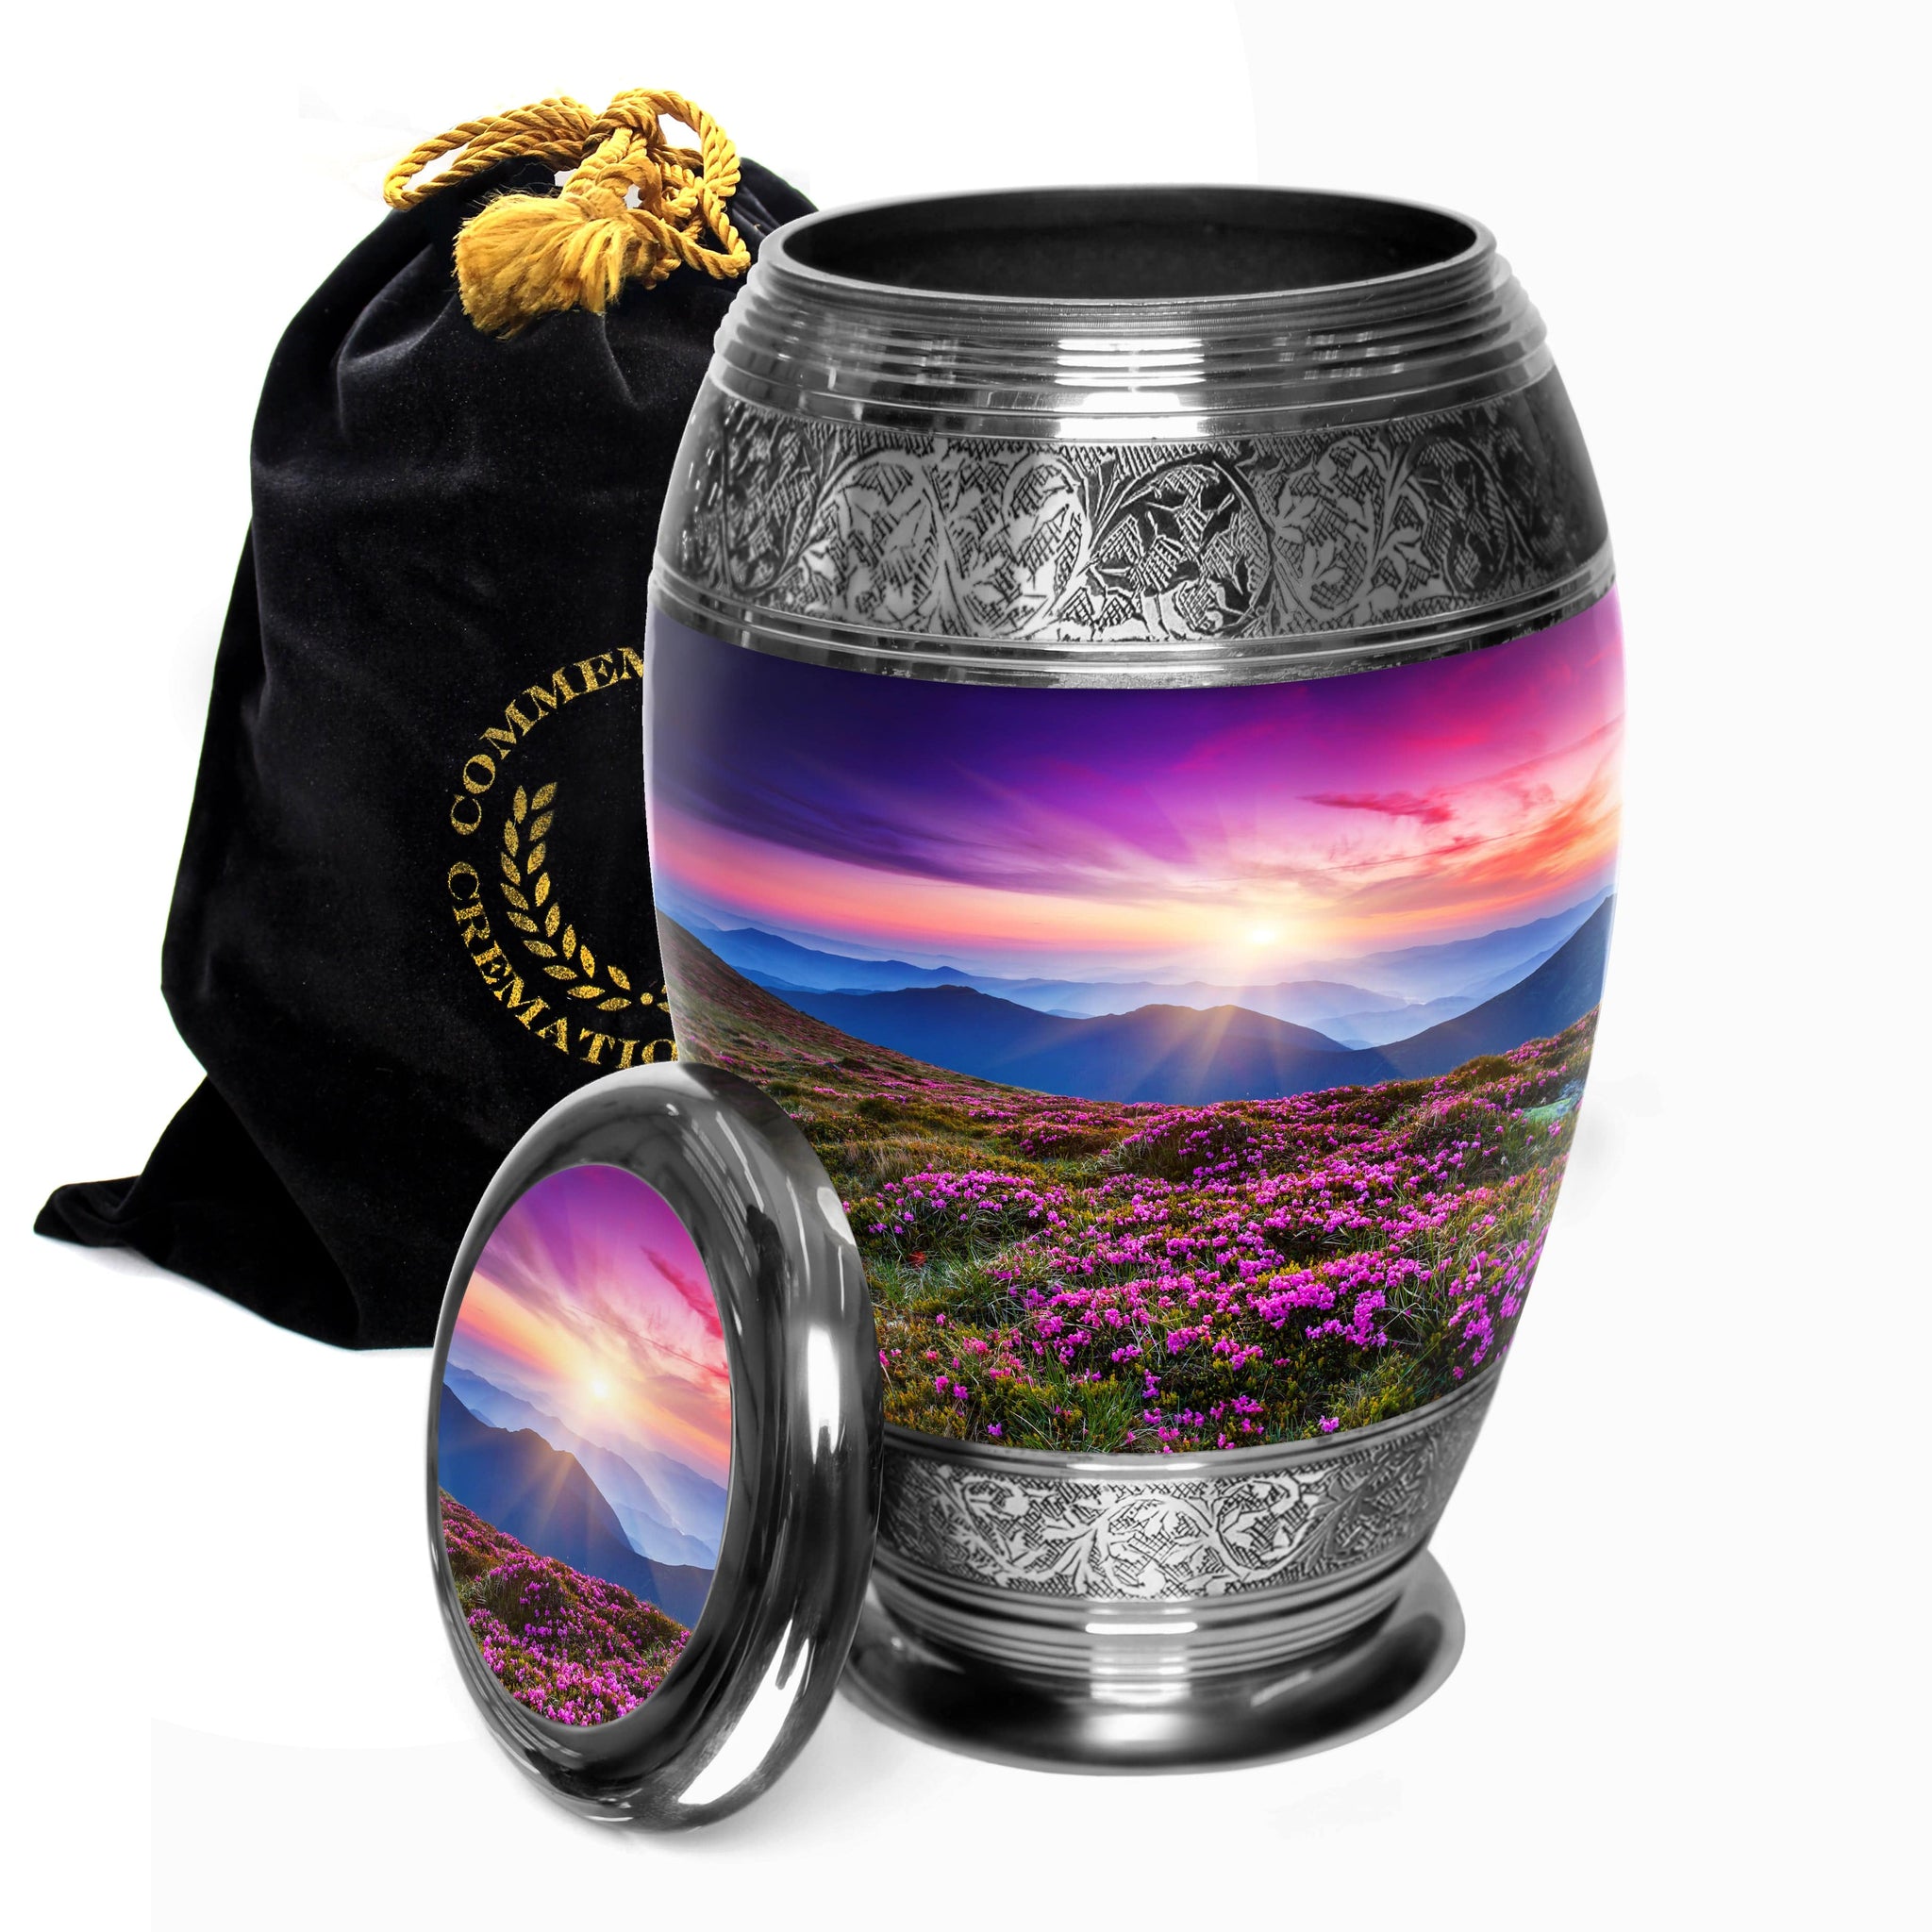 Commemorative Cremation Urns Gone Fishing Cremation Urn for Human Ashes for Funeral, Burial or Home, Cremation Urns for Ashes adult male Large Urns